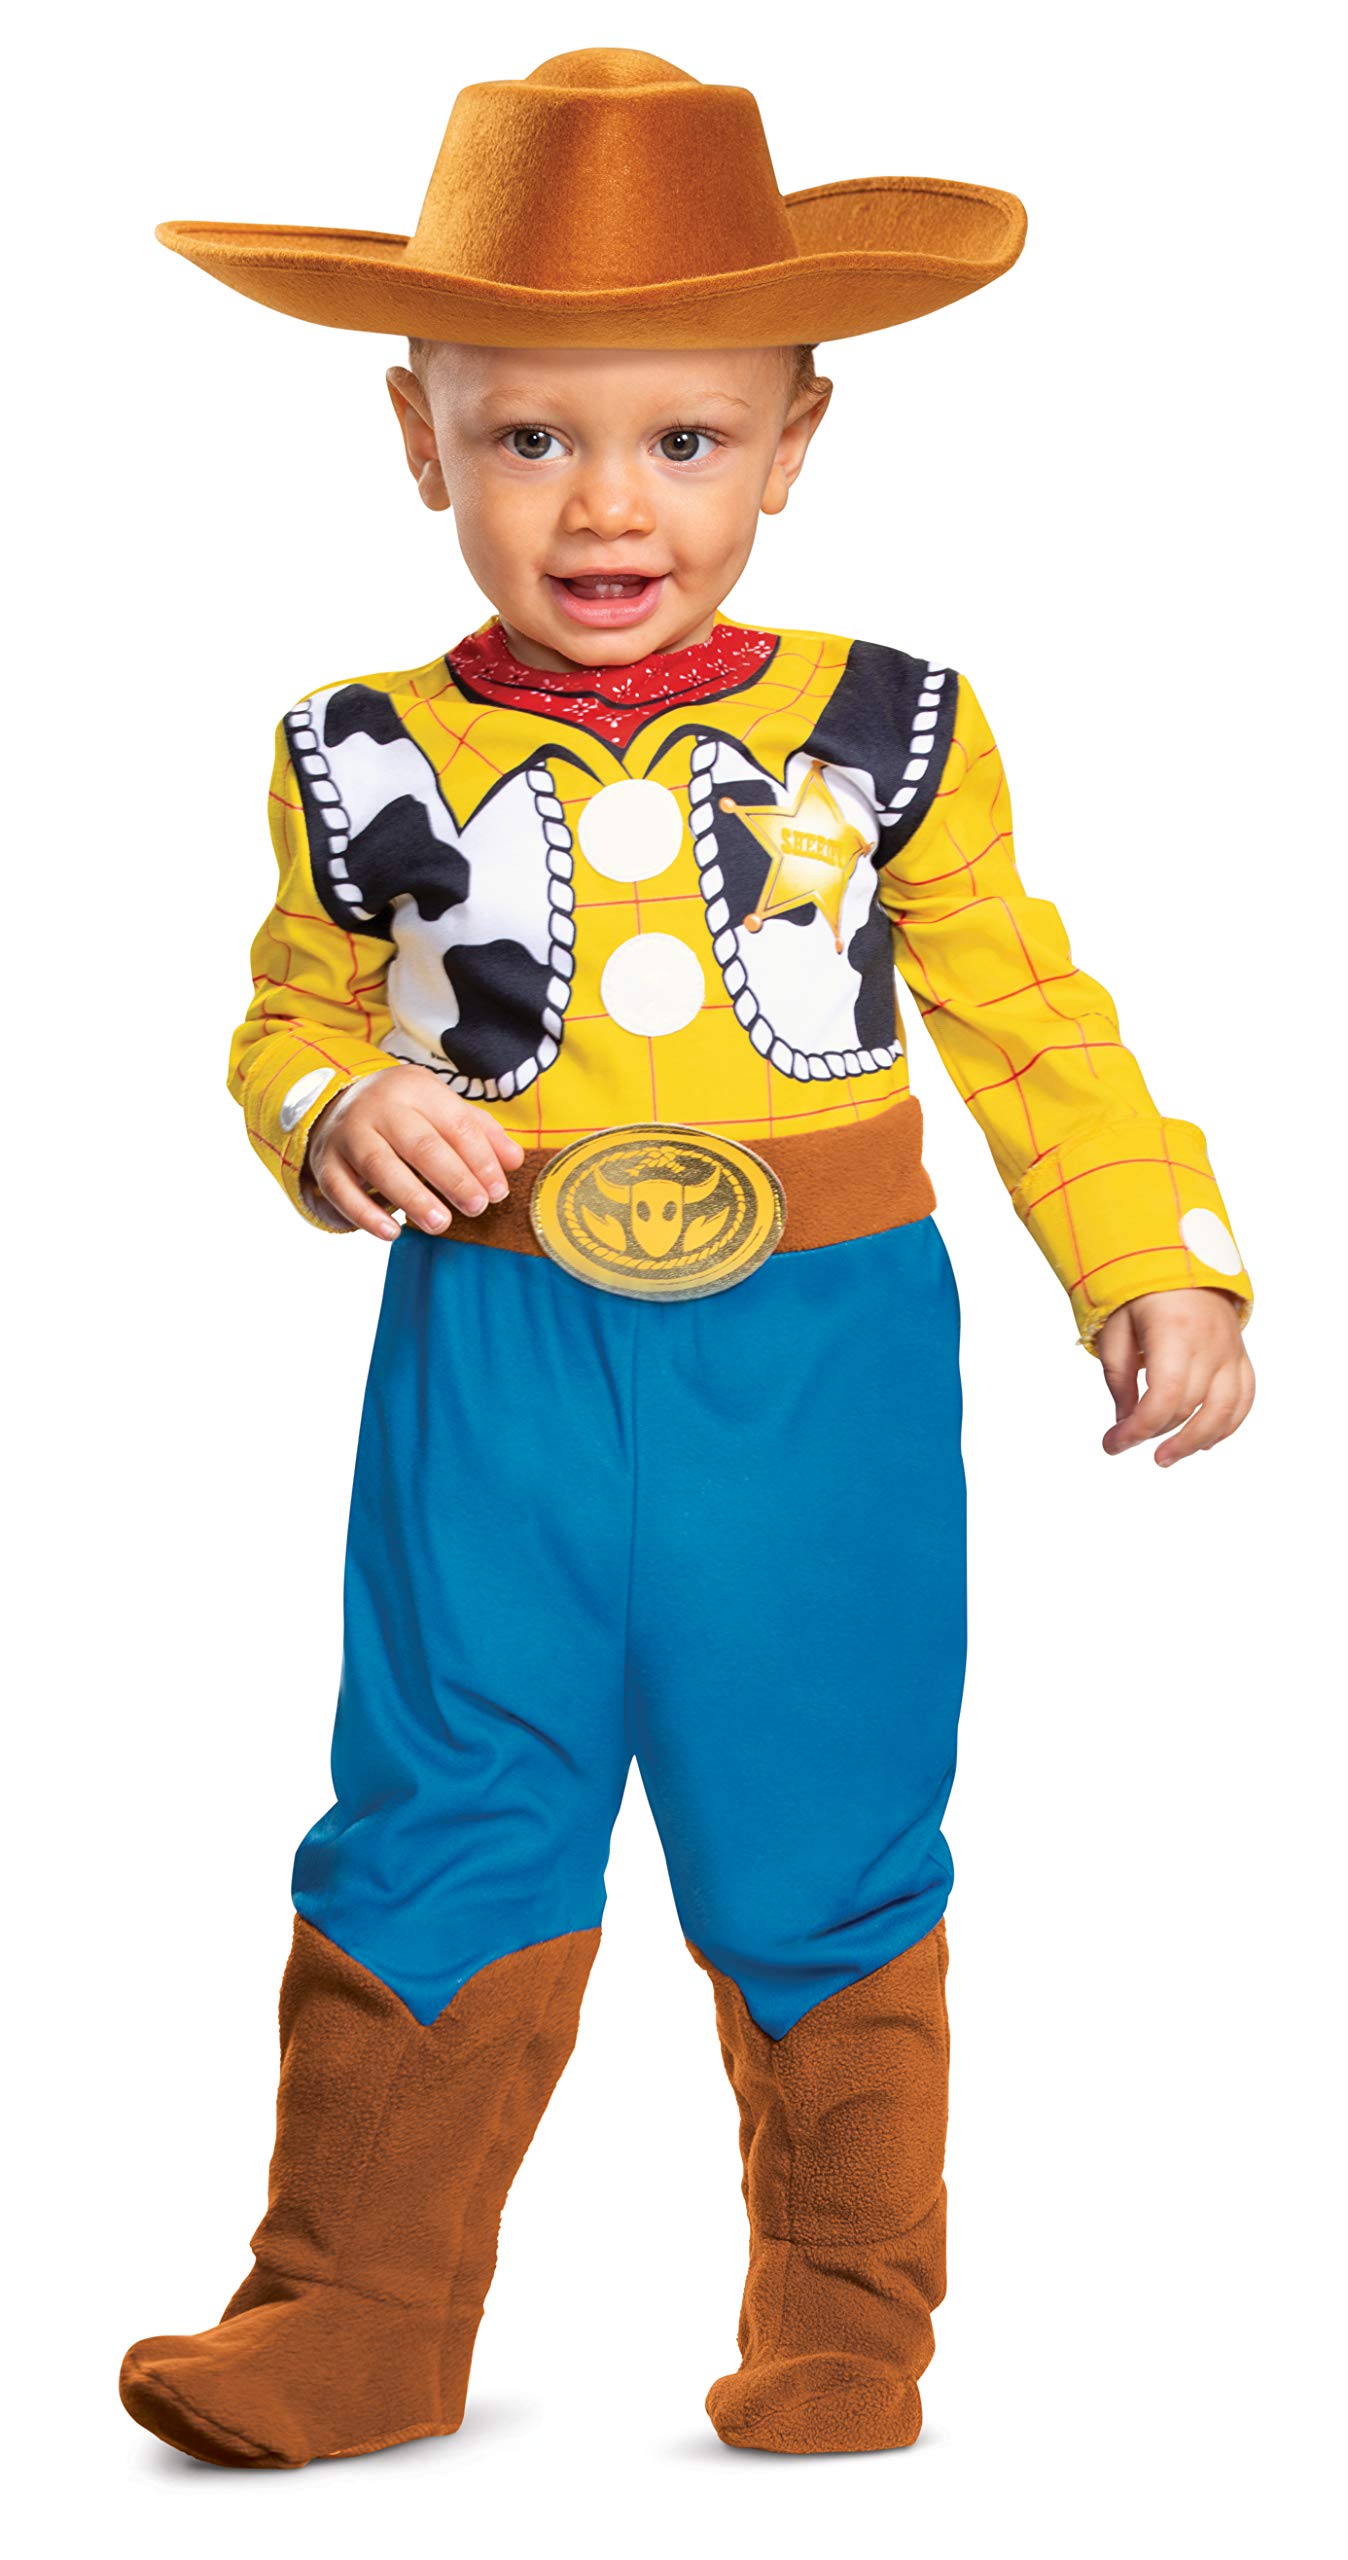 Disguise Baby Boys' Woody Deluxe Infant Costume | eBay